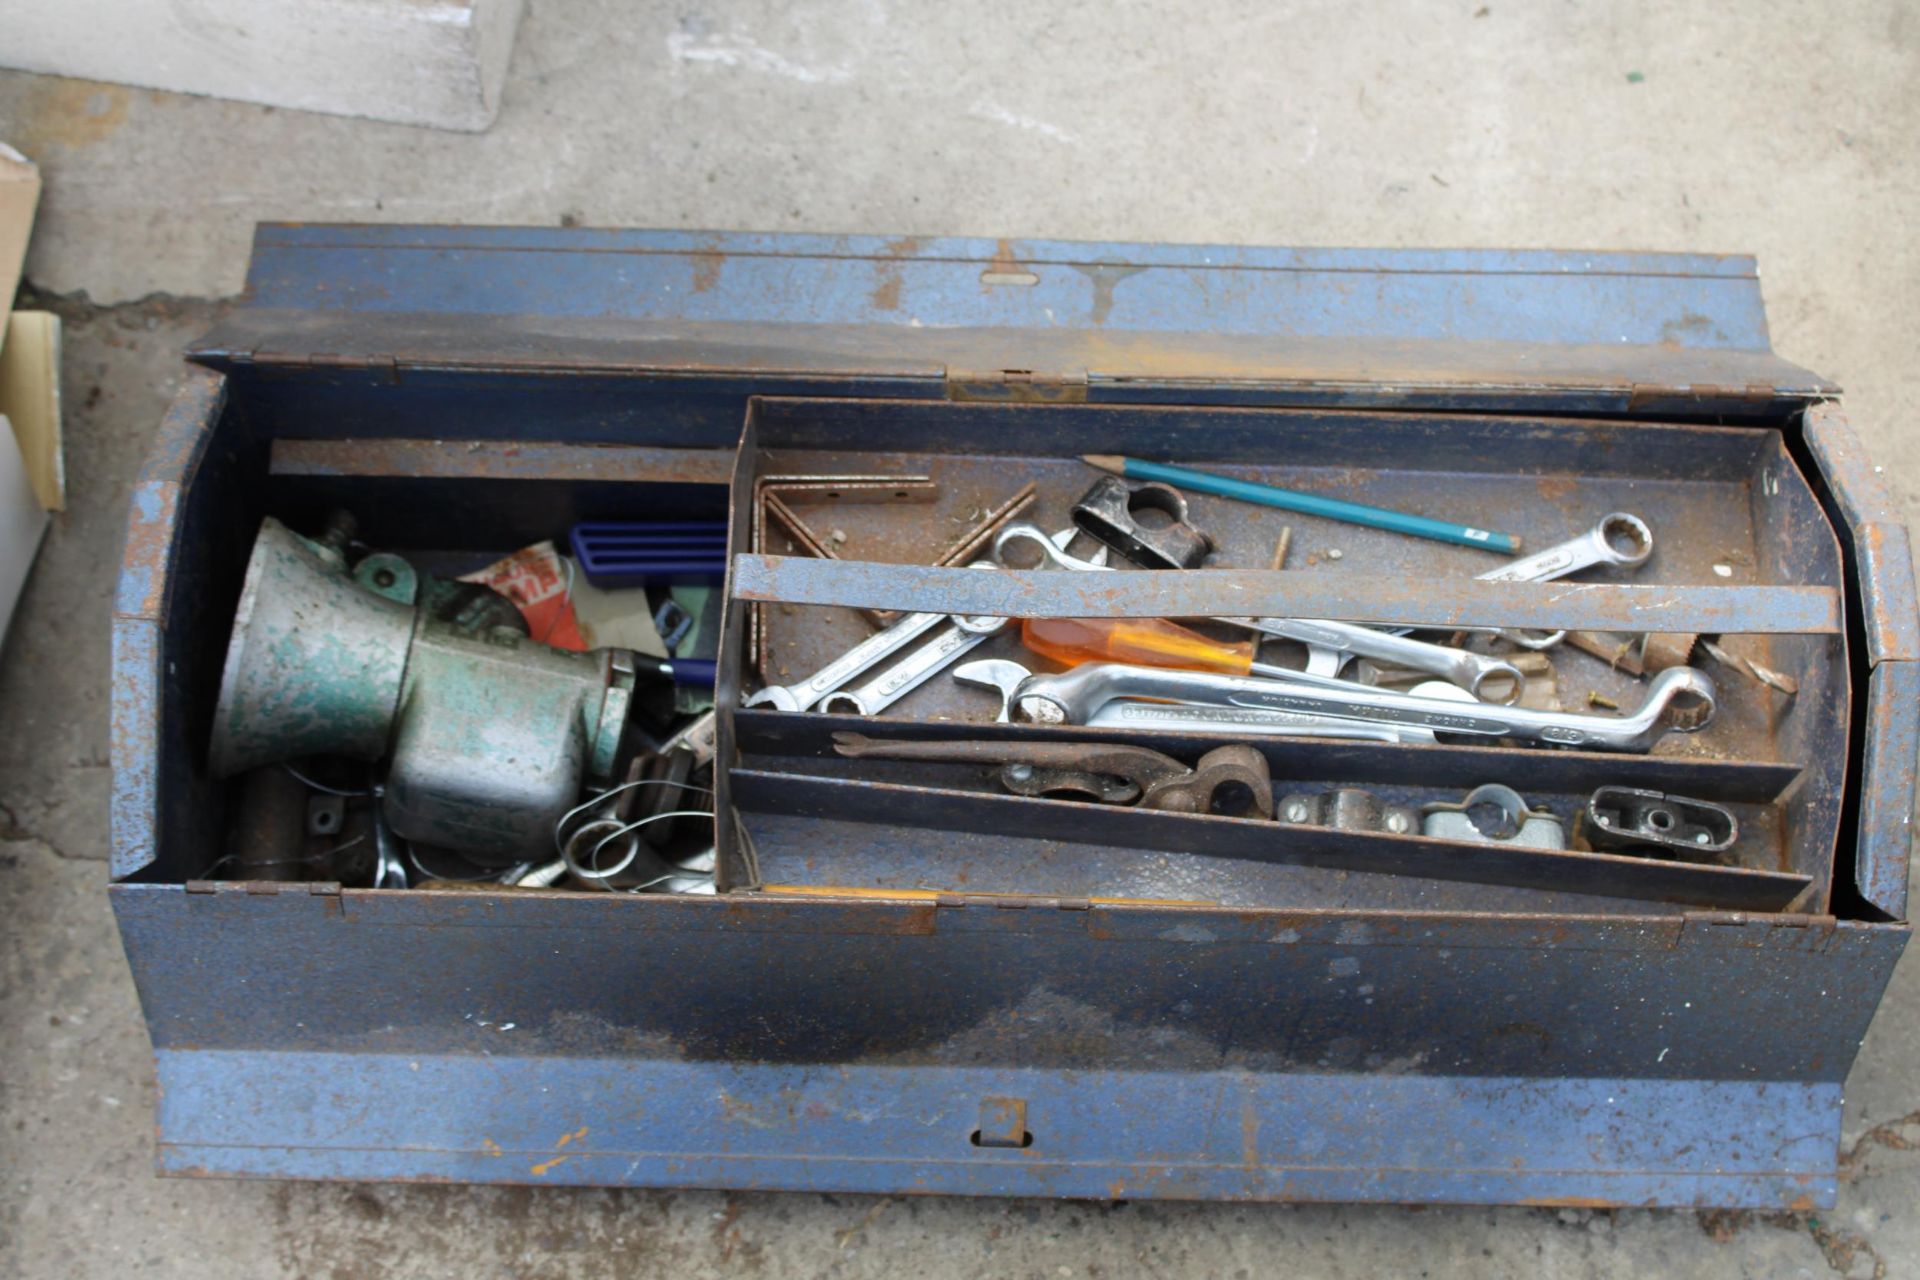 TWO METAL TOOL BOXES WITH AN ASSORTMENT OF TOOLS TO INCLUDE HAMMERS, SPANNERS AND DRILL BITS ETC - Image 2 of 3